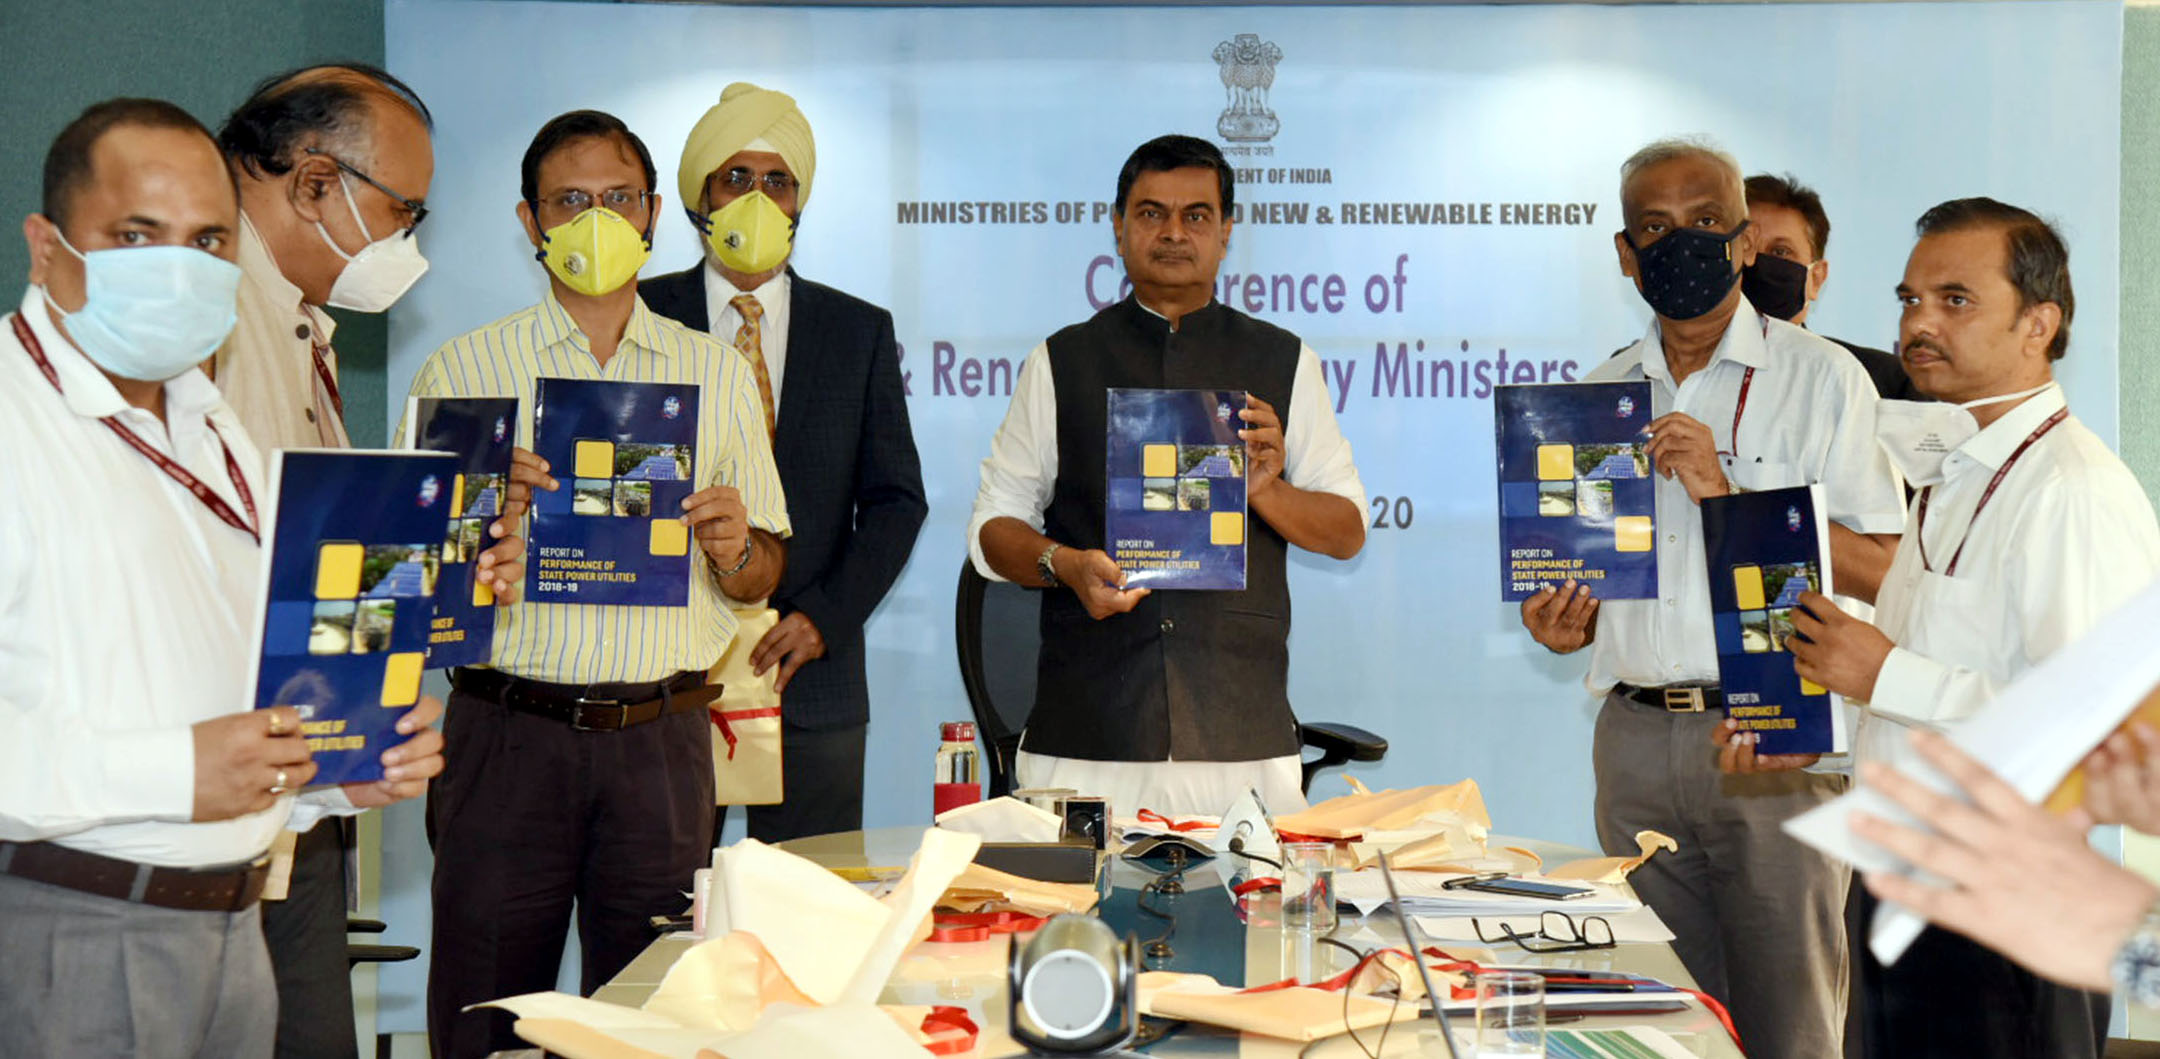 The Minister of State for Power, New & Renewable Energy (Independent Charge) and Skill Development & Entrepreneurship, Shri Raj Kumar Singh releasing a publication at a Conference of Power and New & Renewable Energy Ministers of States & UTs, through Video Conferencing, in New Delhi on July 03, 2020. The Secretary, Ministry of Power, Shri Sanjeev Nandan Sahai is also seen.